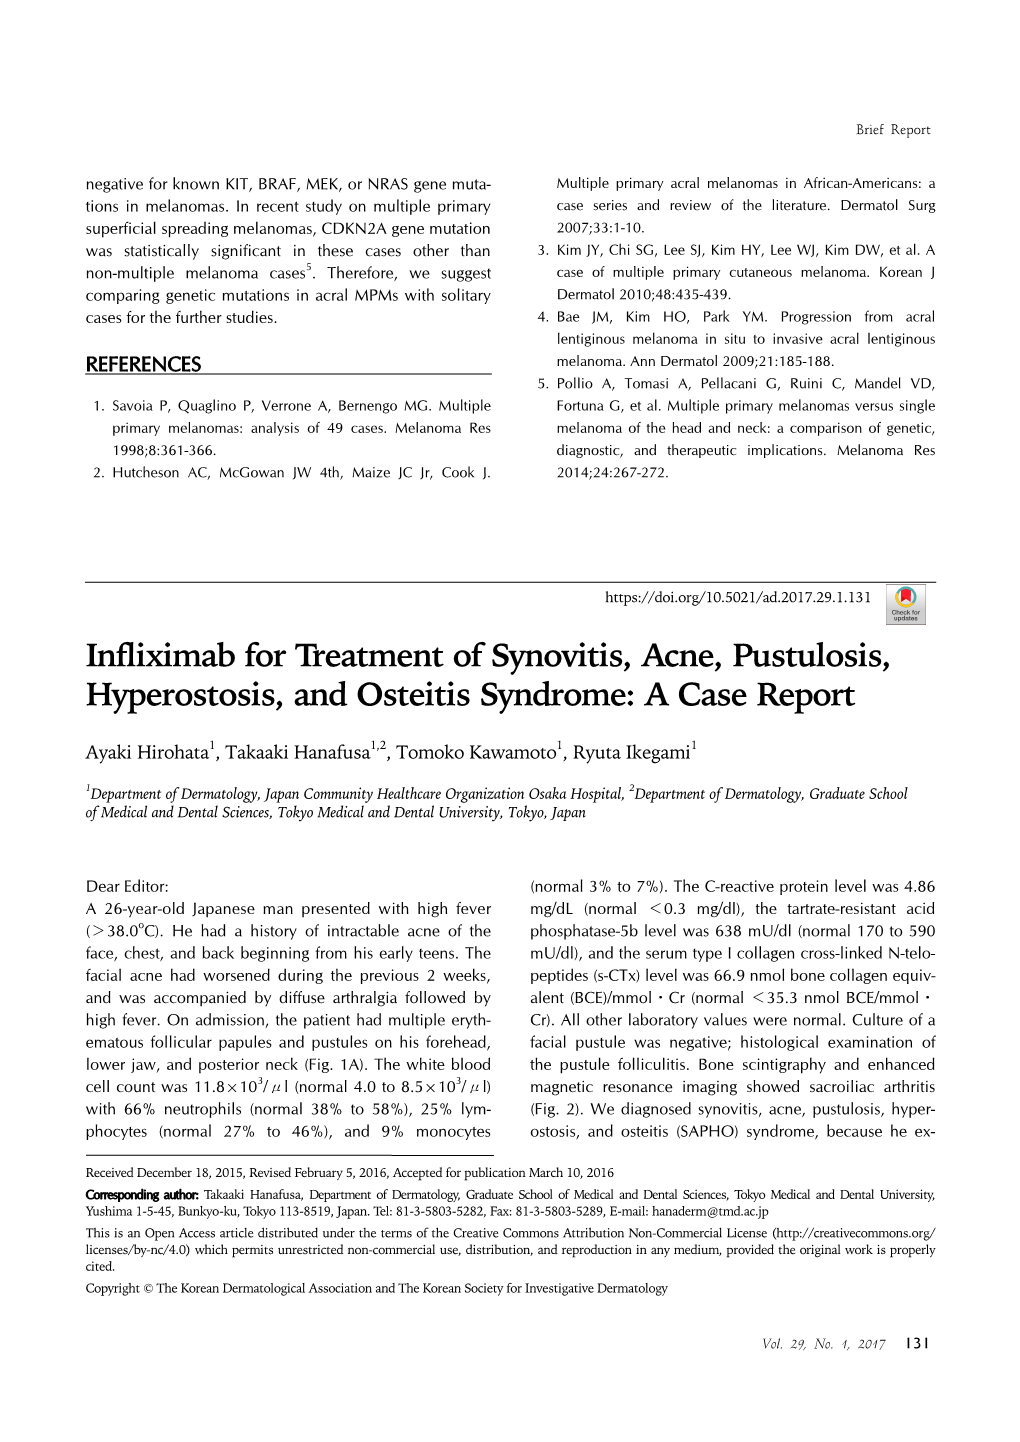 Infliximab for Treatment of Synovitis, Acne, Pustulosis, Hyperostosis, and Osteitis Syndrome: a Case Report